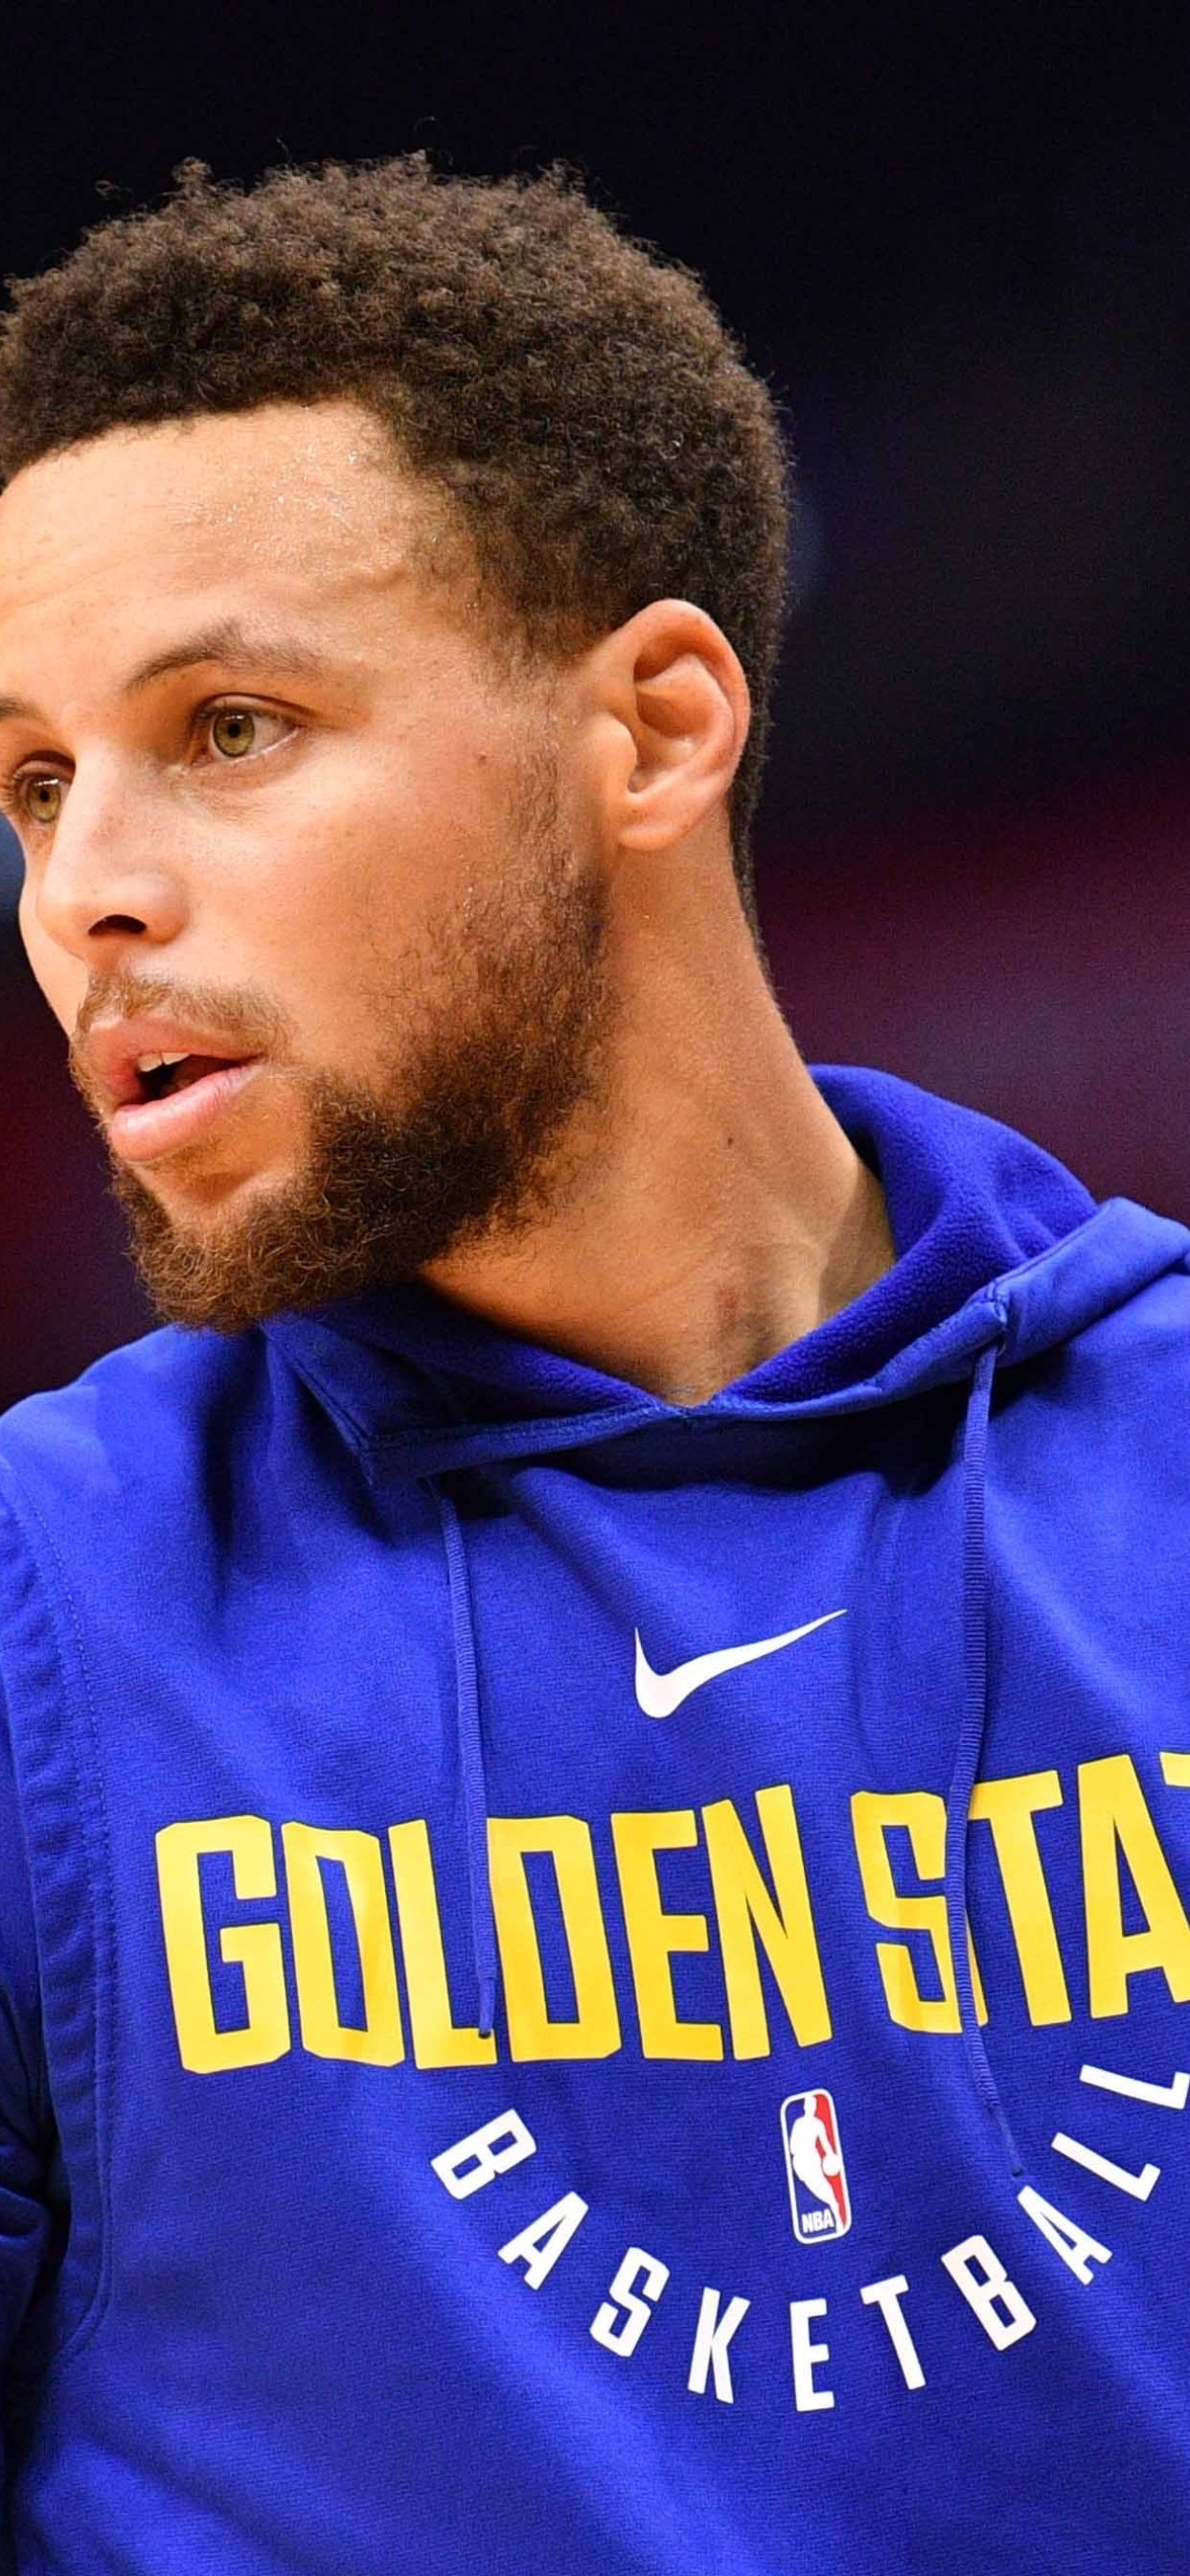 Stephen Curry NBA Player iPhone XS MAX Wallpaper, HD